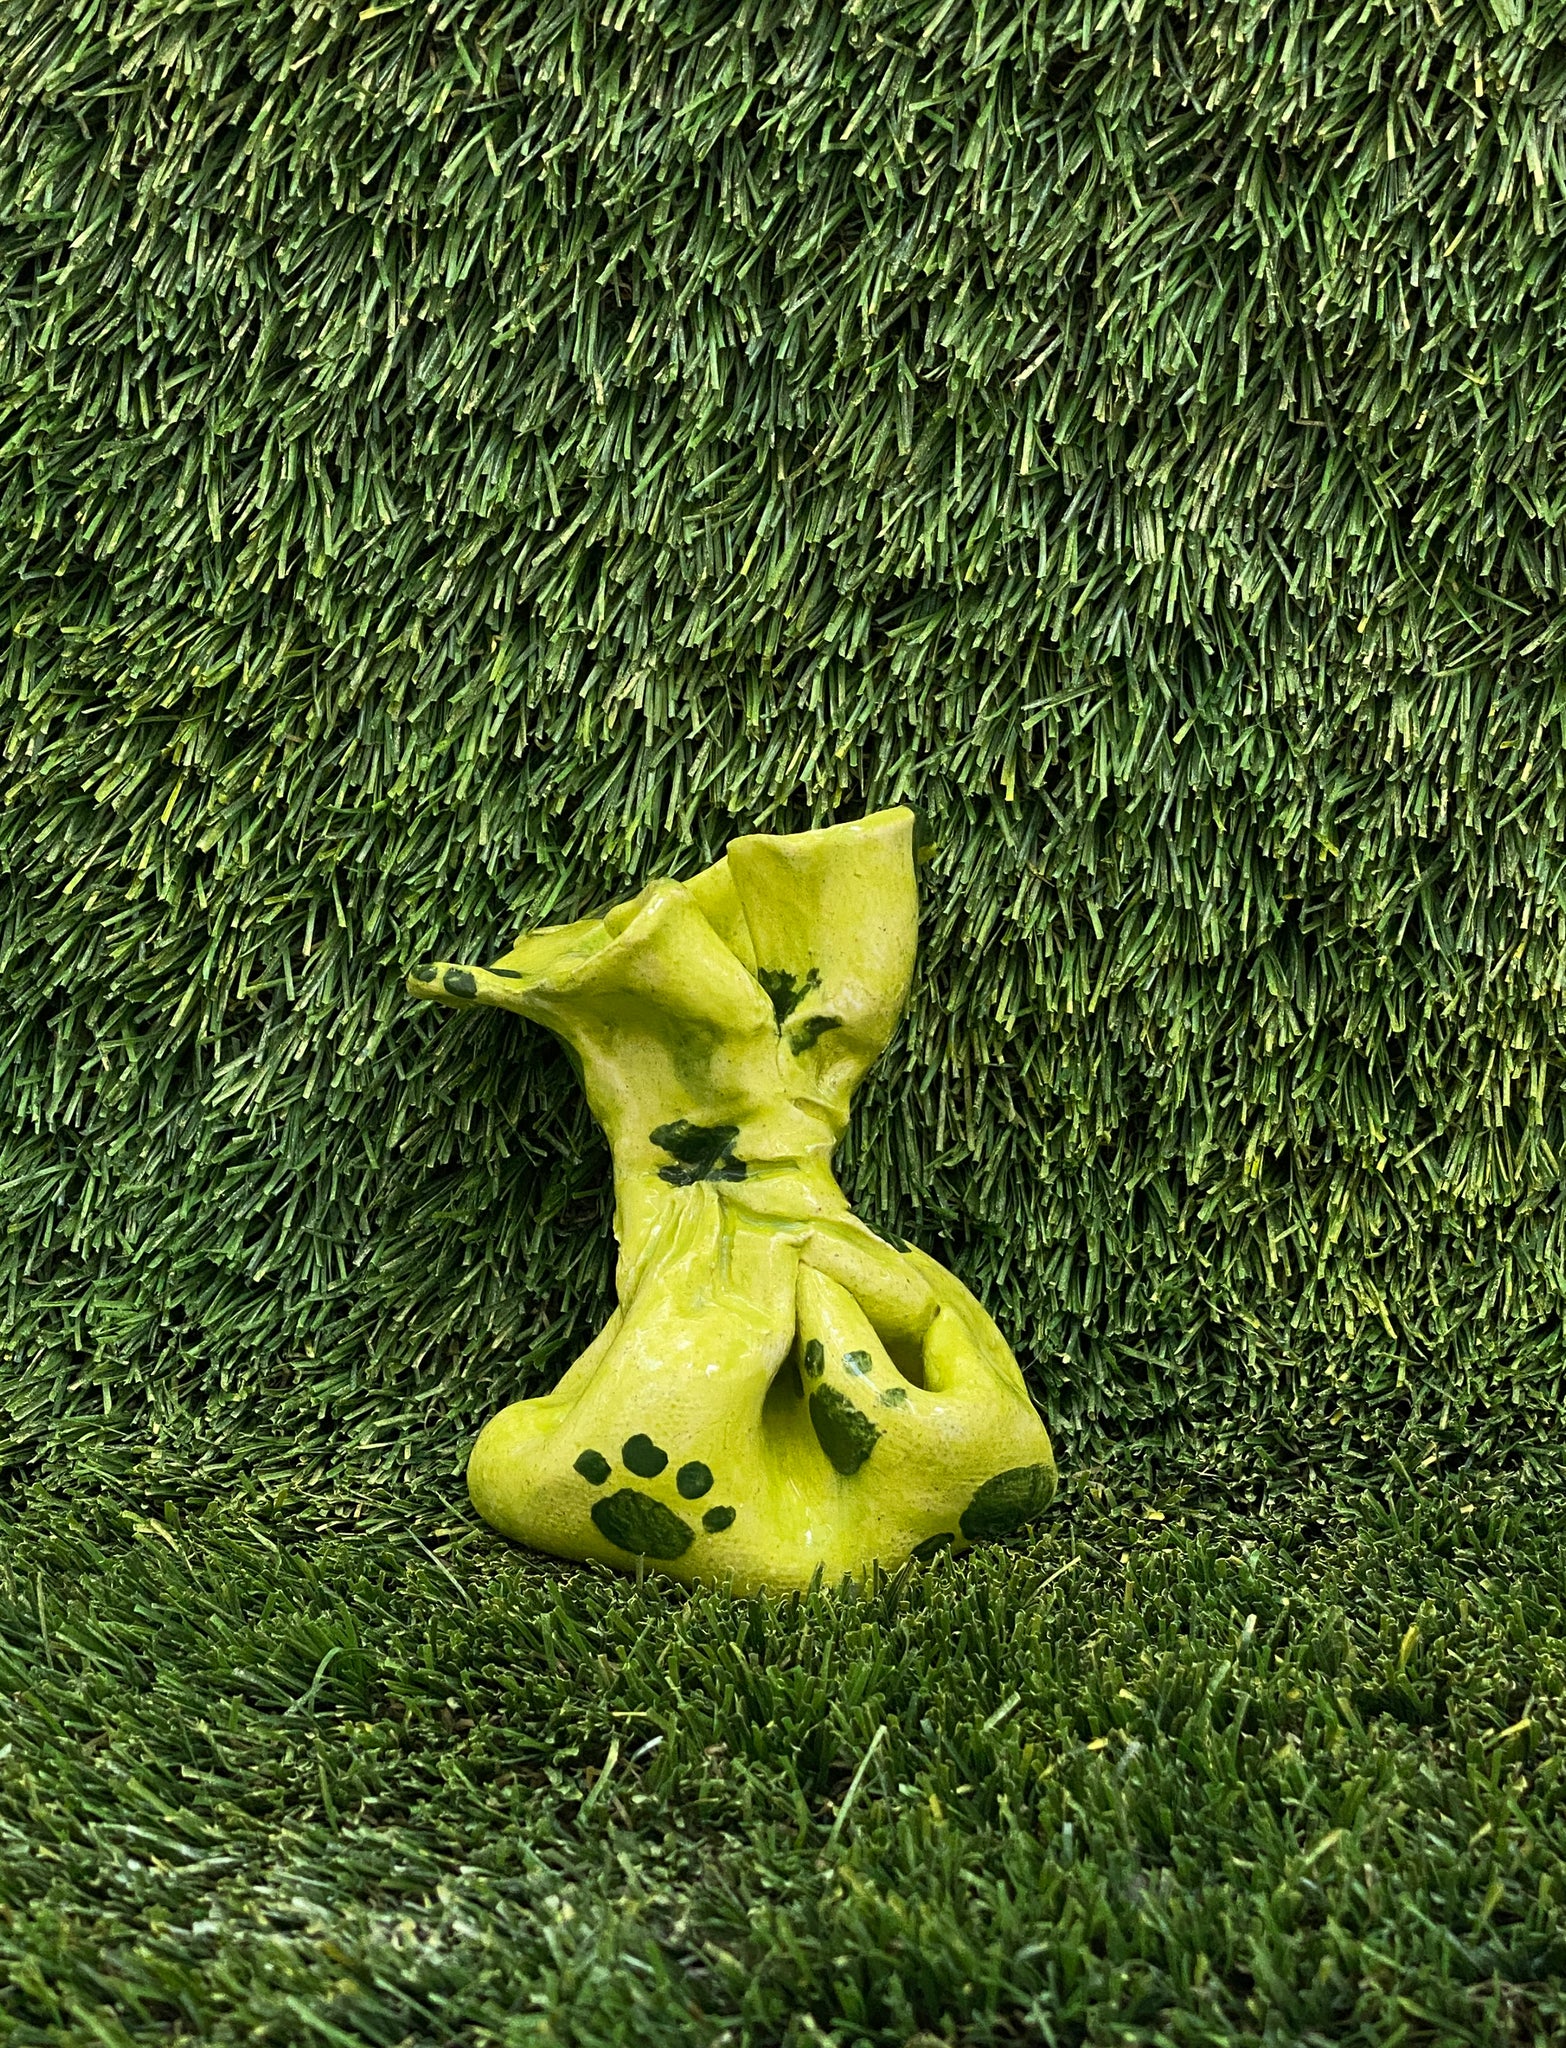 Ceramic sculpture of dog poop bag in green with paw print